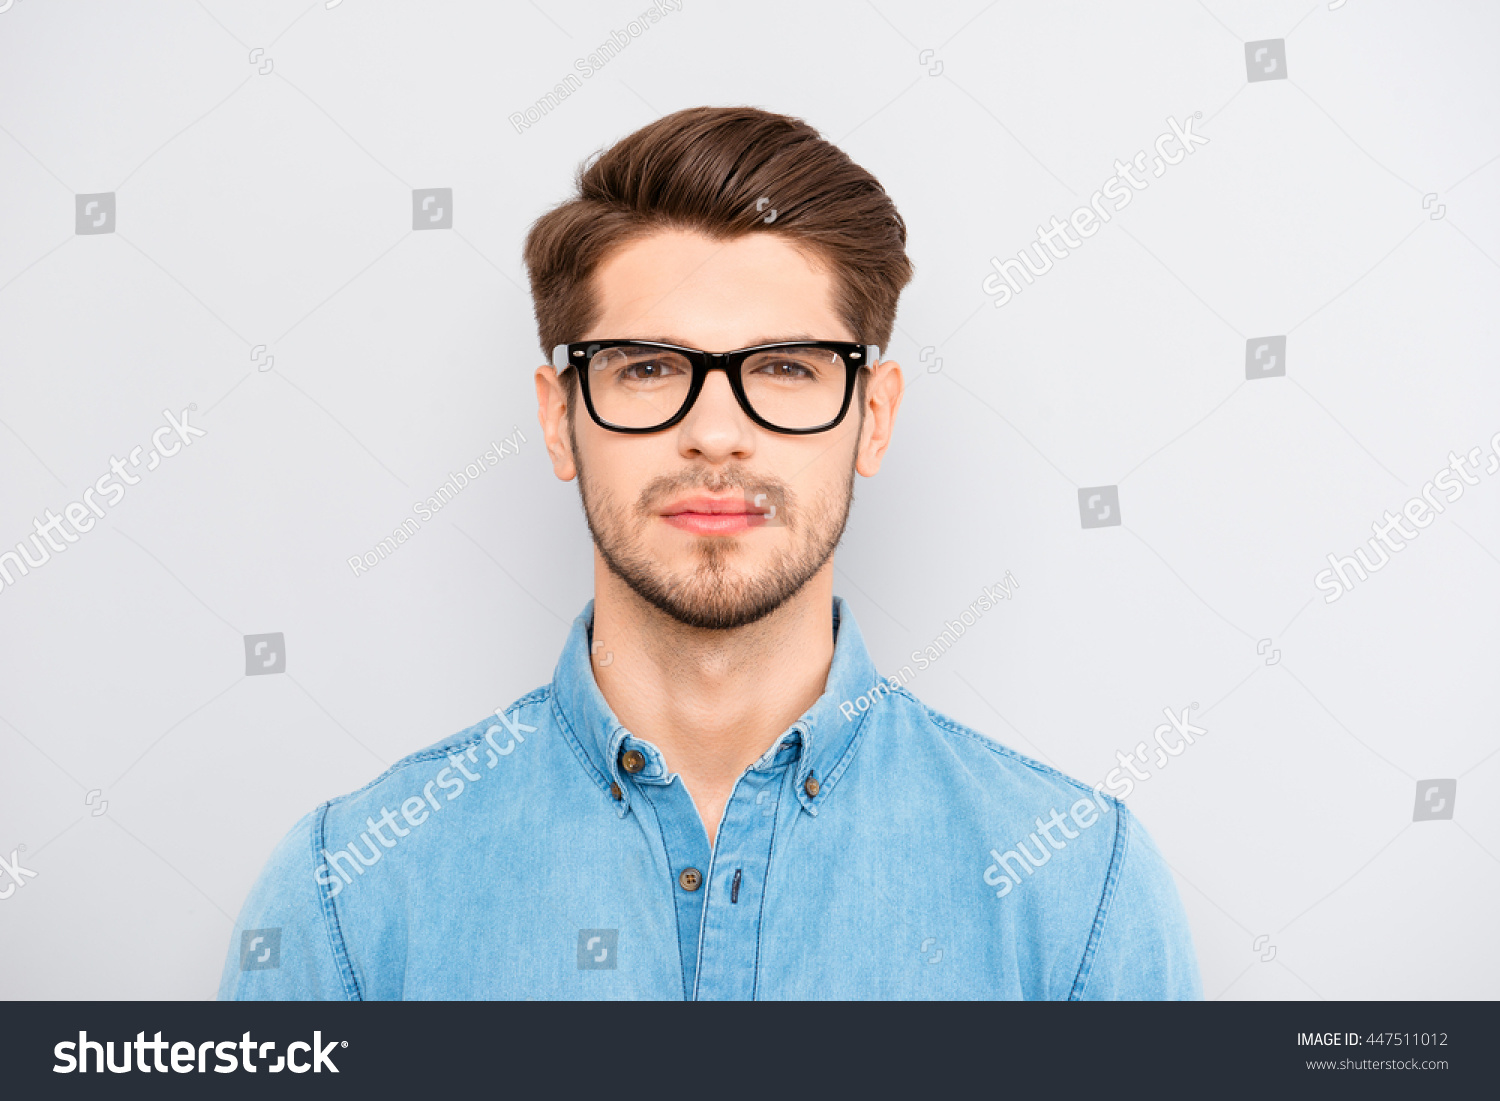 Portrait of serious calm minded businessman wearing glasses #447511012